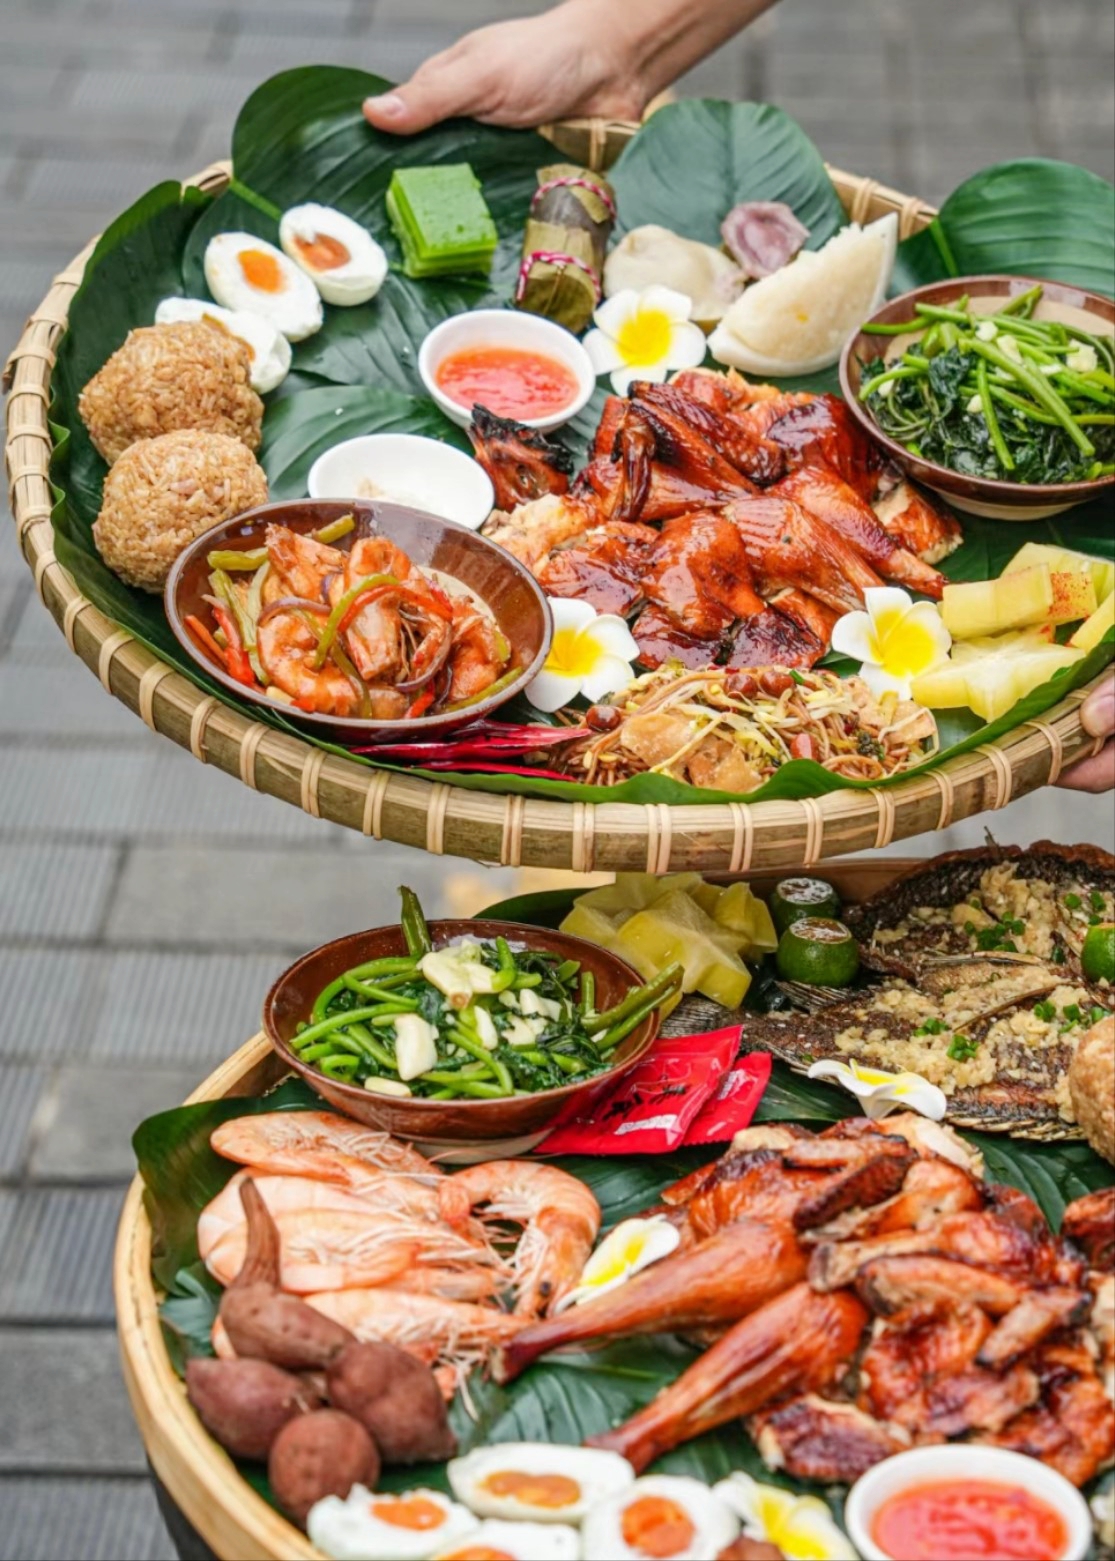 Boji Rice is to put different Hainan-style delicacies into a bamboo or wicker container, including coconut rice, roasted Wenchang chicken, braised pork feet, stir-fried seafood, sea duck eggs, and tropical fruits. /Photo provided to CGTN